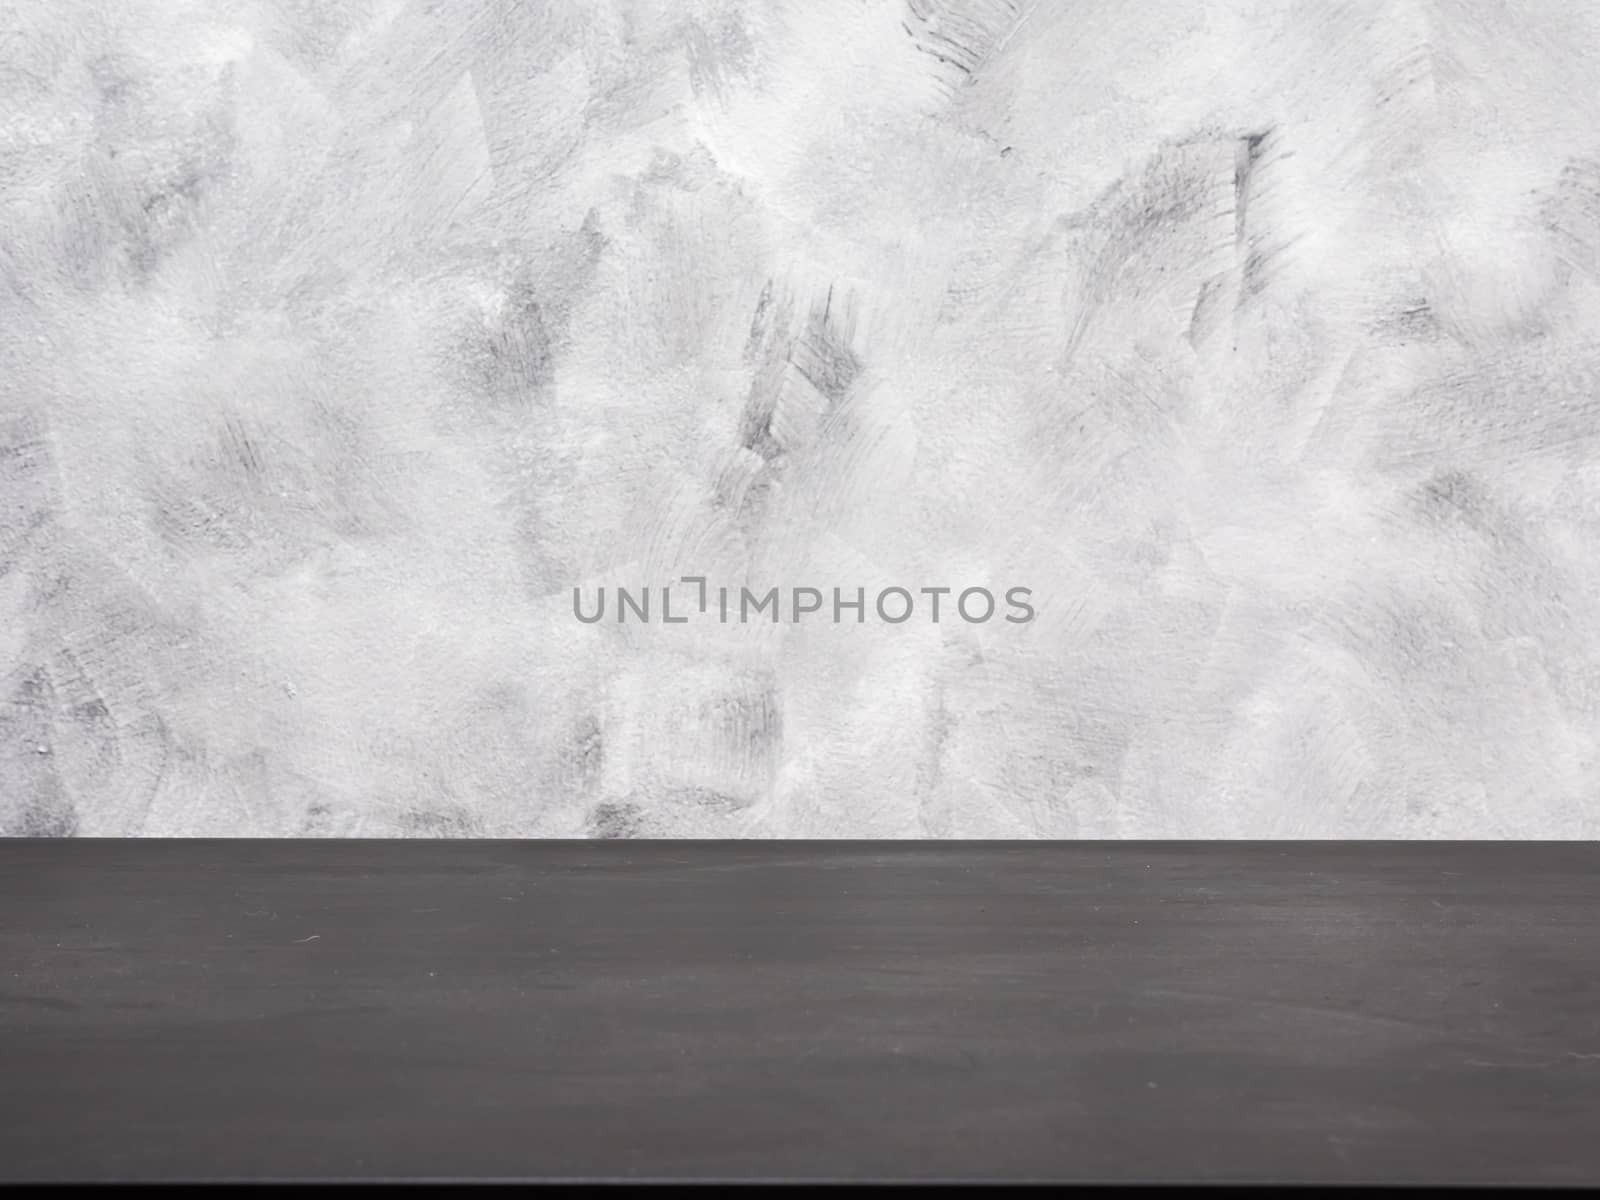 Empty black wooden table on a grunge background.